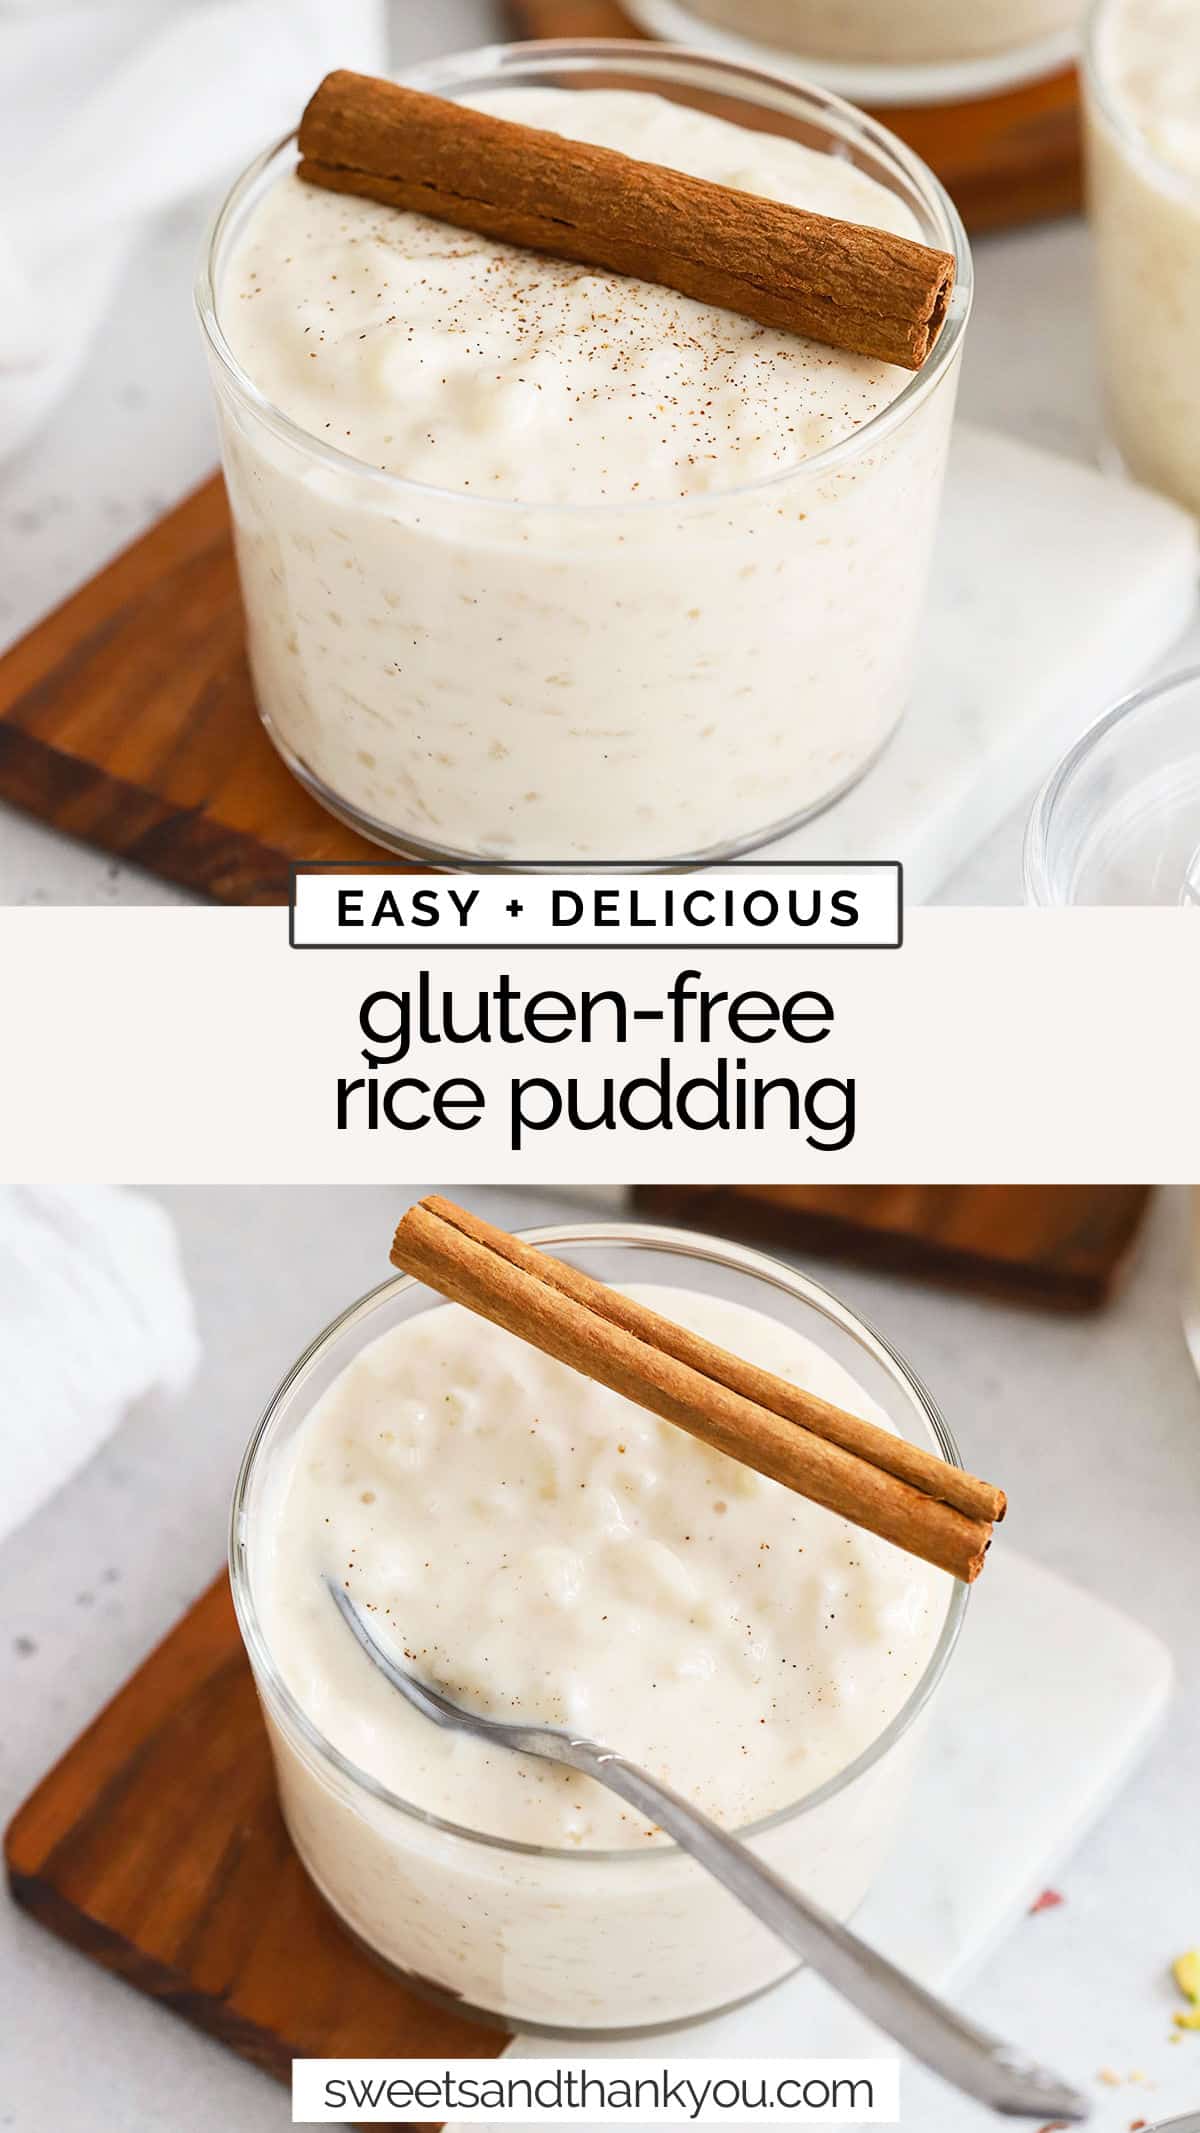 Our gluten-free rice pudding recipe has all the classic flavor and creamy texture you crave. If you're craving old fashioned rice pudding, this creamy rice pudding is here to deliver. Made from simple ingredients, this traditional dessert recipe is easy to make and easy on your budget! It's the perfect beginner dessert recipe. 